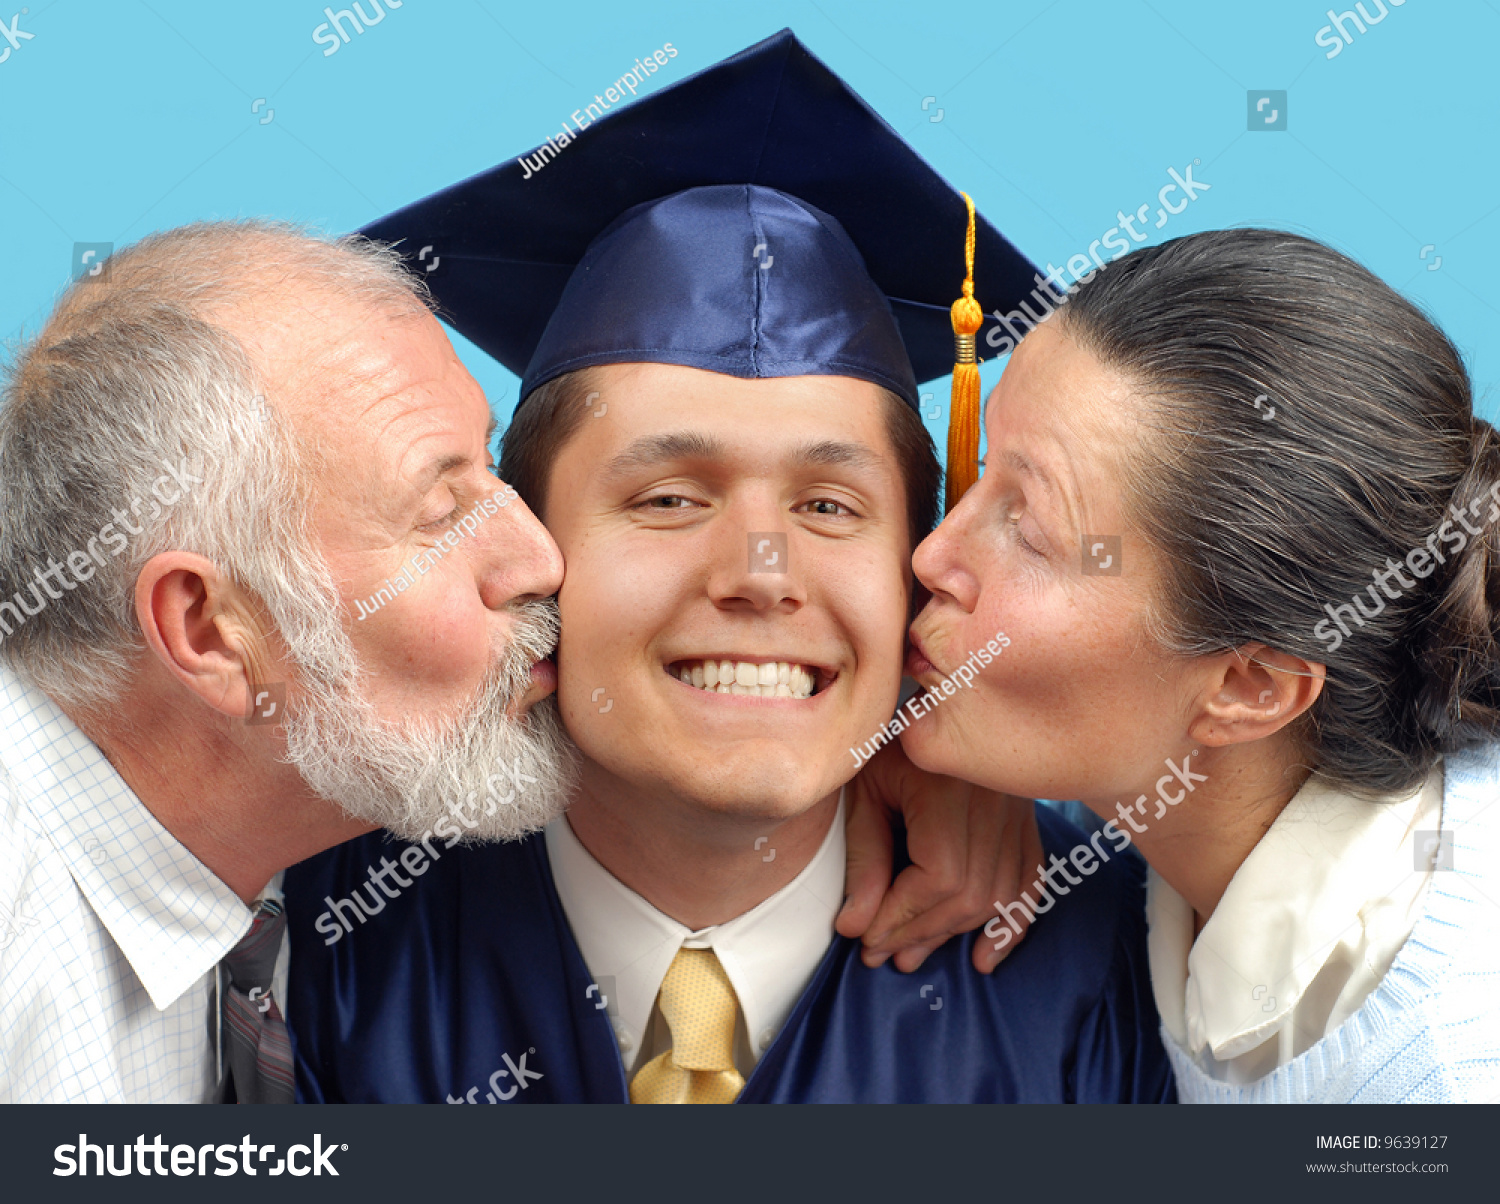 http://image.shutterstock.com/z/stock-photo-proud-parents-kissing-their-graduating-son-on-both-cheeks-9639127.jpg